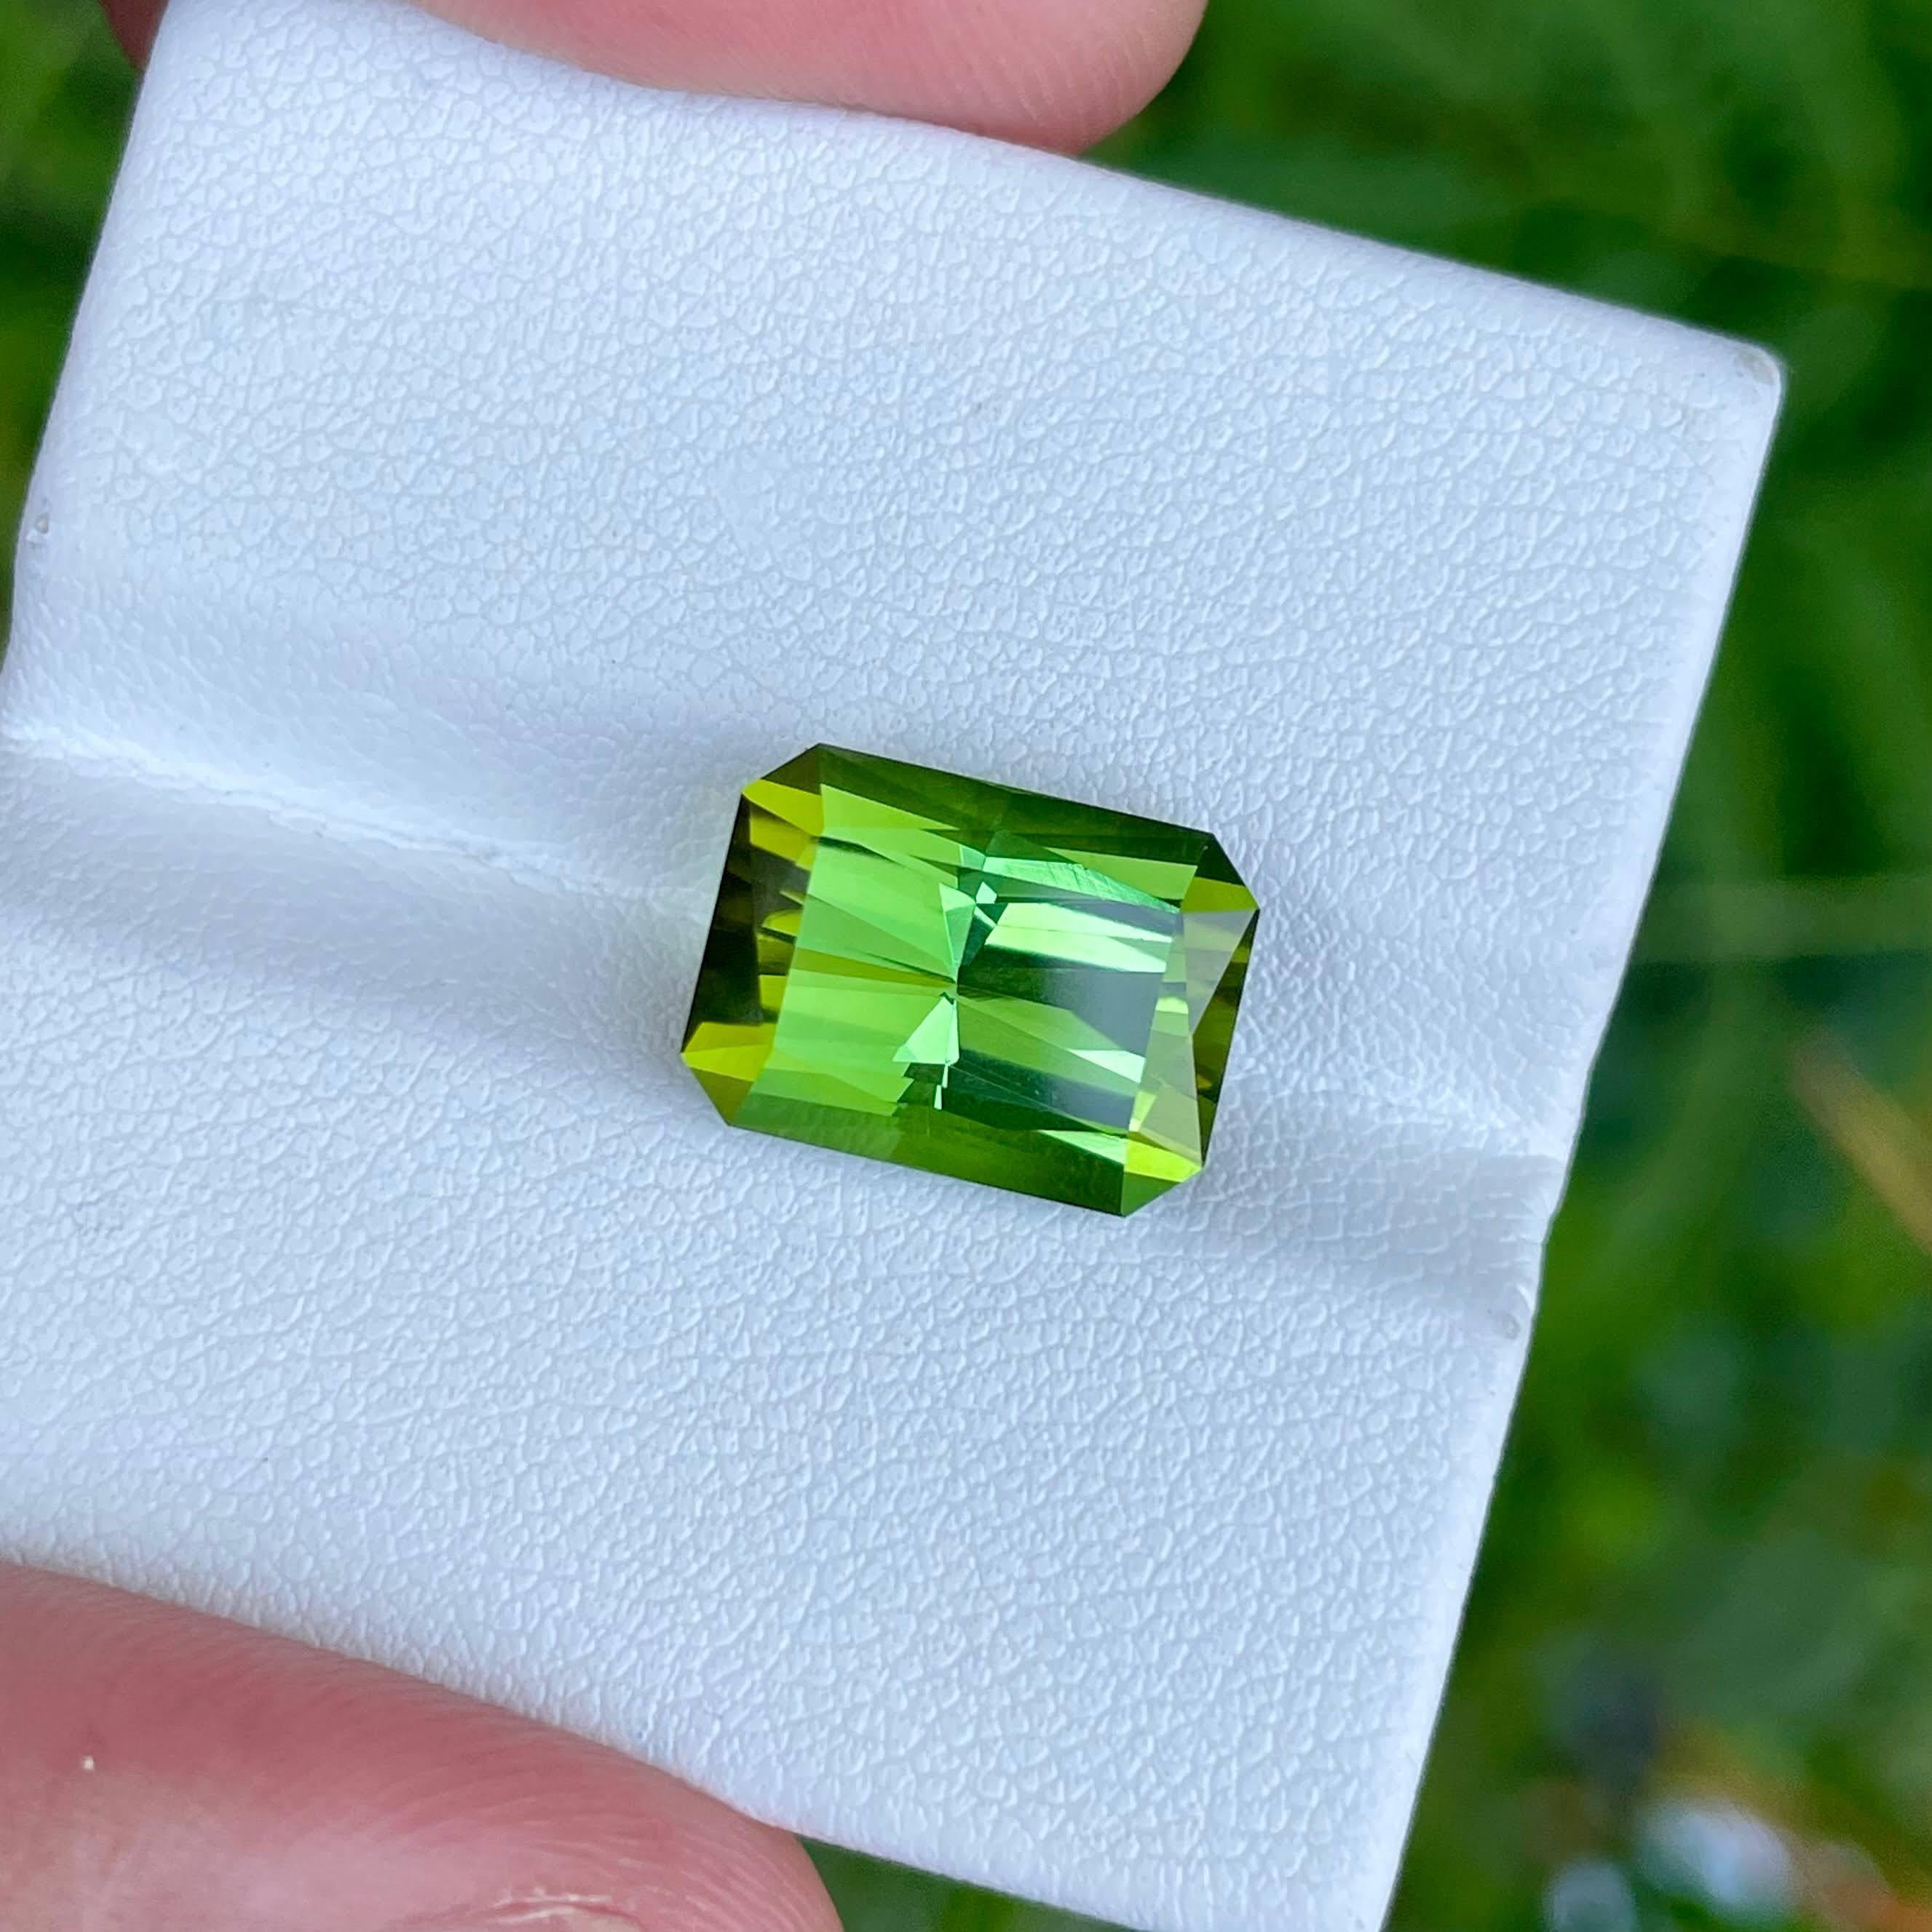 Weight 8.38 carats
Dimensions 13x9.5x8.05 mm
Treatment none 
Origin Afghanistan 
Clarity loupe clean 
Shape octagon 
Cut scissors 




The Green Tourmaline Stone you possess is a captivating gem of natural origin, originating from the rich